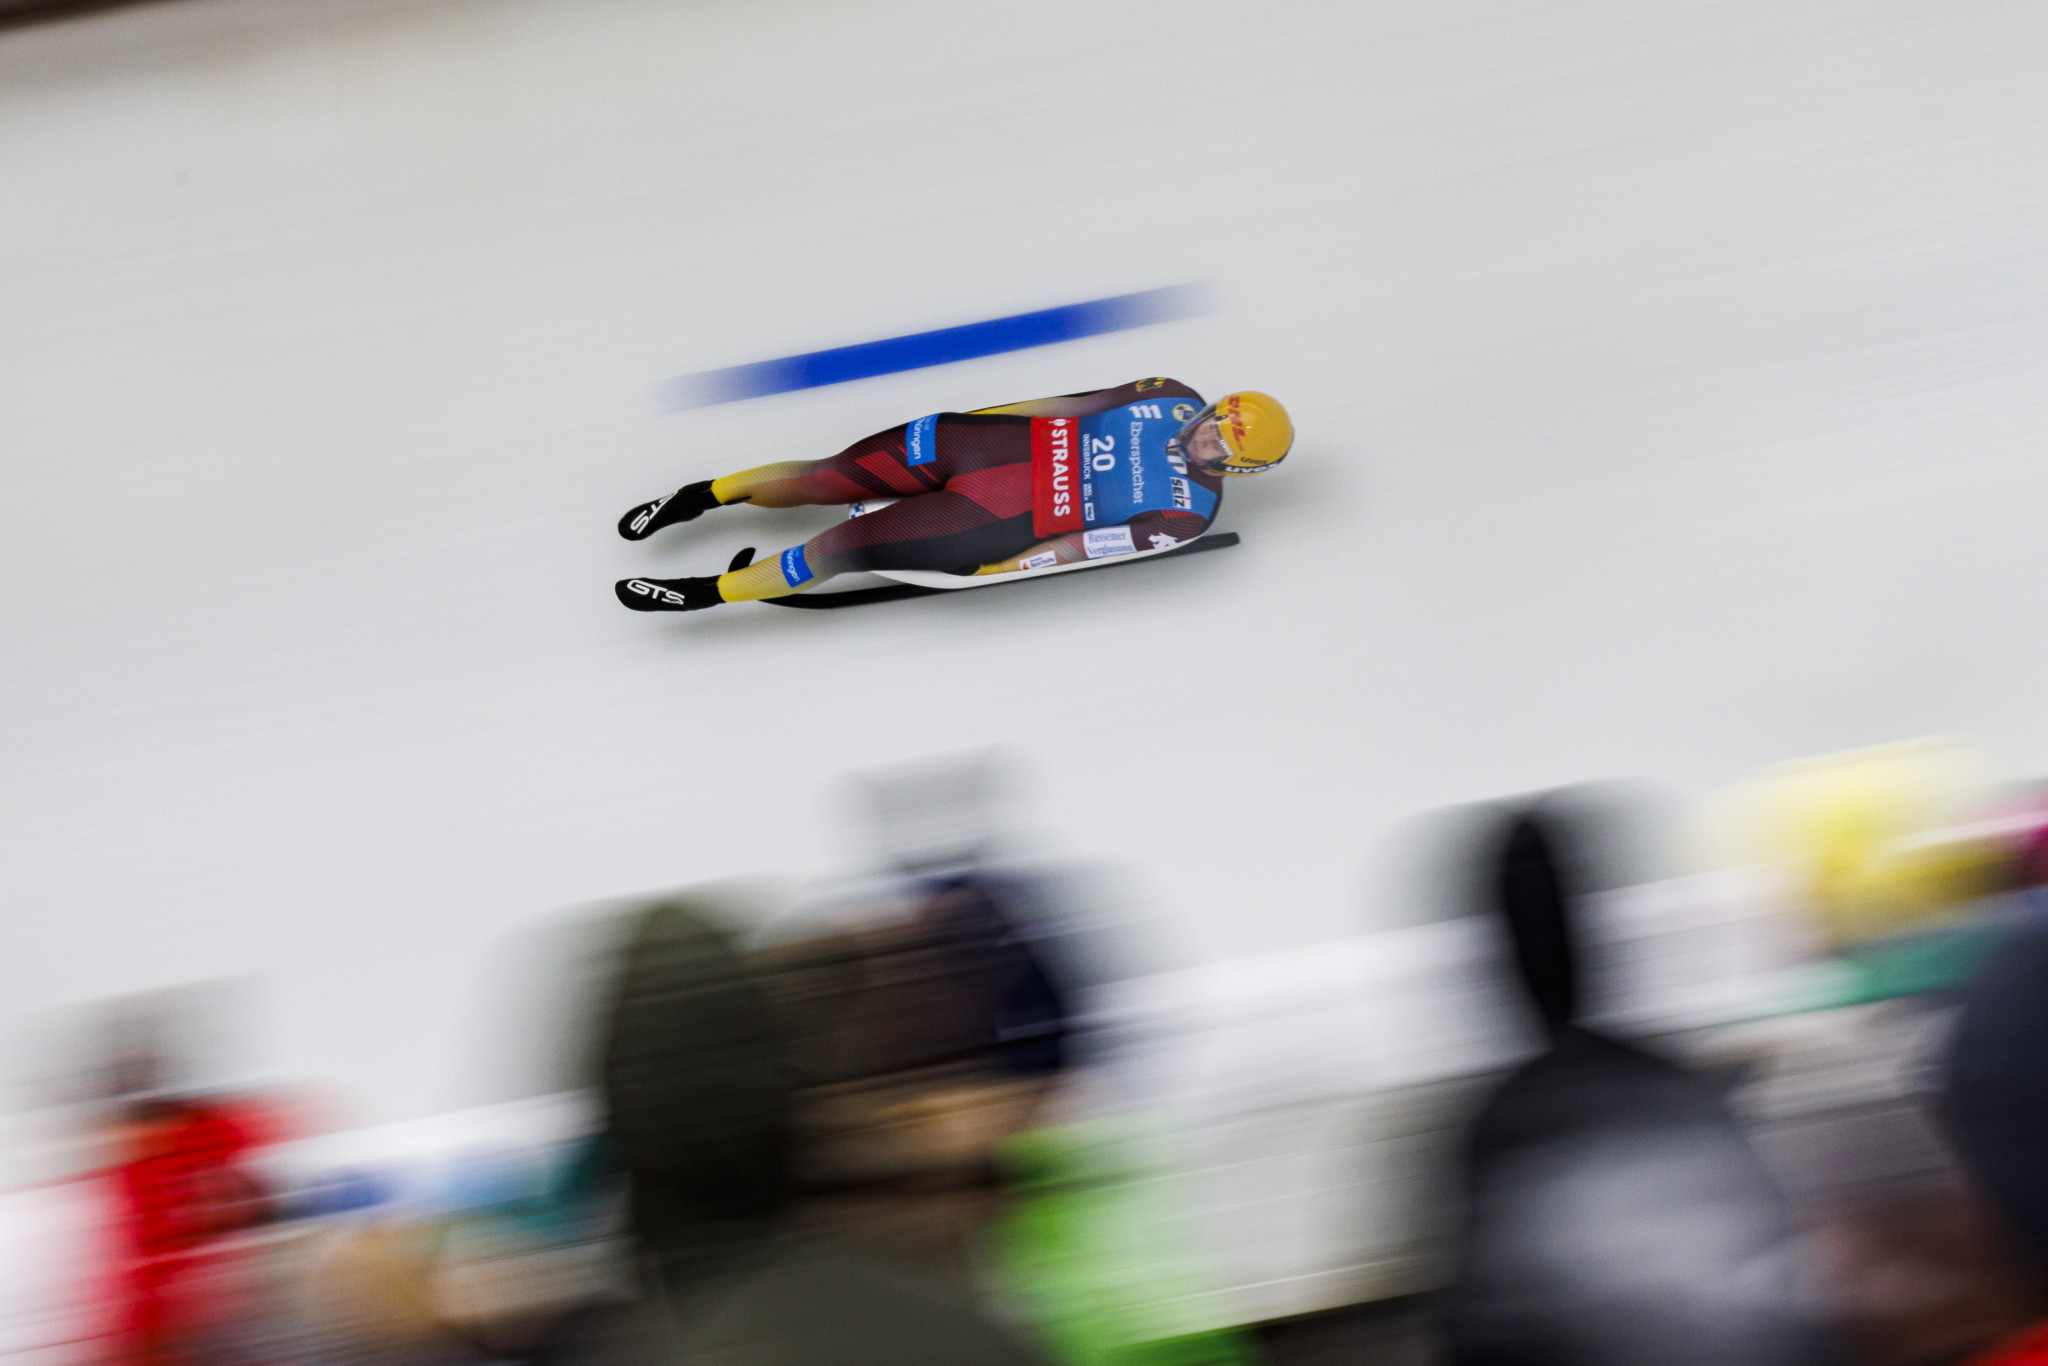 Eitberger enjoys birthday to remember as she wins women’s singles at Luge World Cup in Sigulda